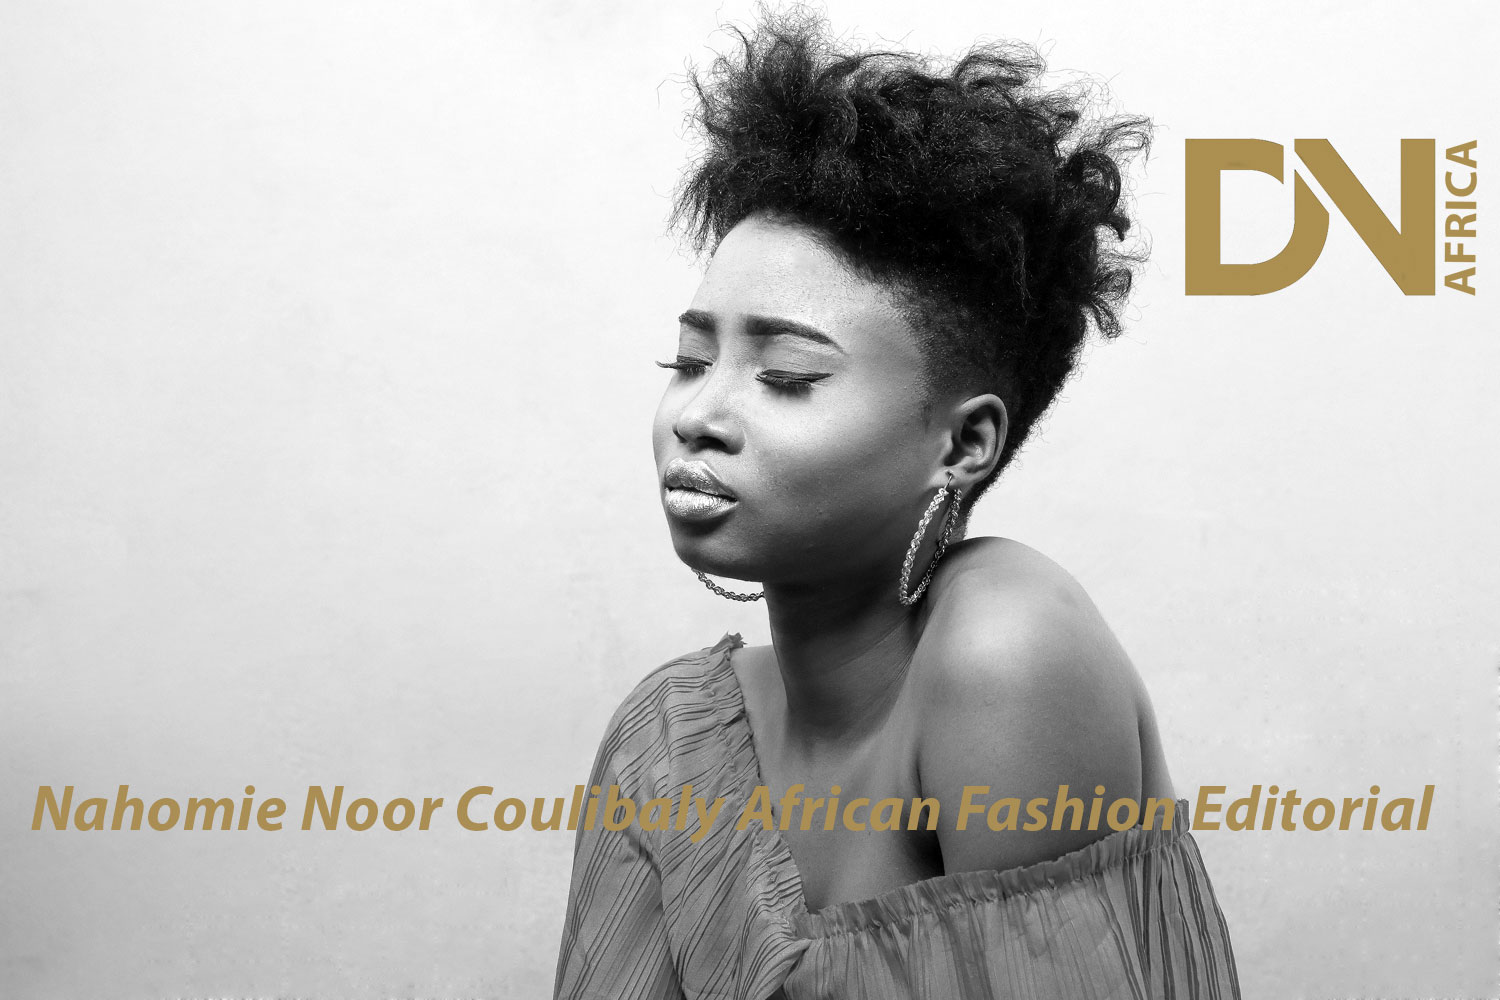 AFRICAN FASHION STYLE MAGAZINE - Nahomie Noor Coulibaly - African Fashion Editorial - Photographer DAN NGU - Media Partner DN AFRICA - STUDIO 24 NIGERIA - STUDIO 24 INTERNATIONAL - Ifeanyi Christopher Oputa MD AND CEO OF COLVI LIMITED AND STUDIO 24 - Nahomie NOOR COULIBALY